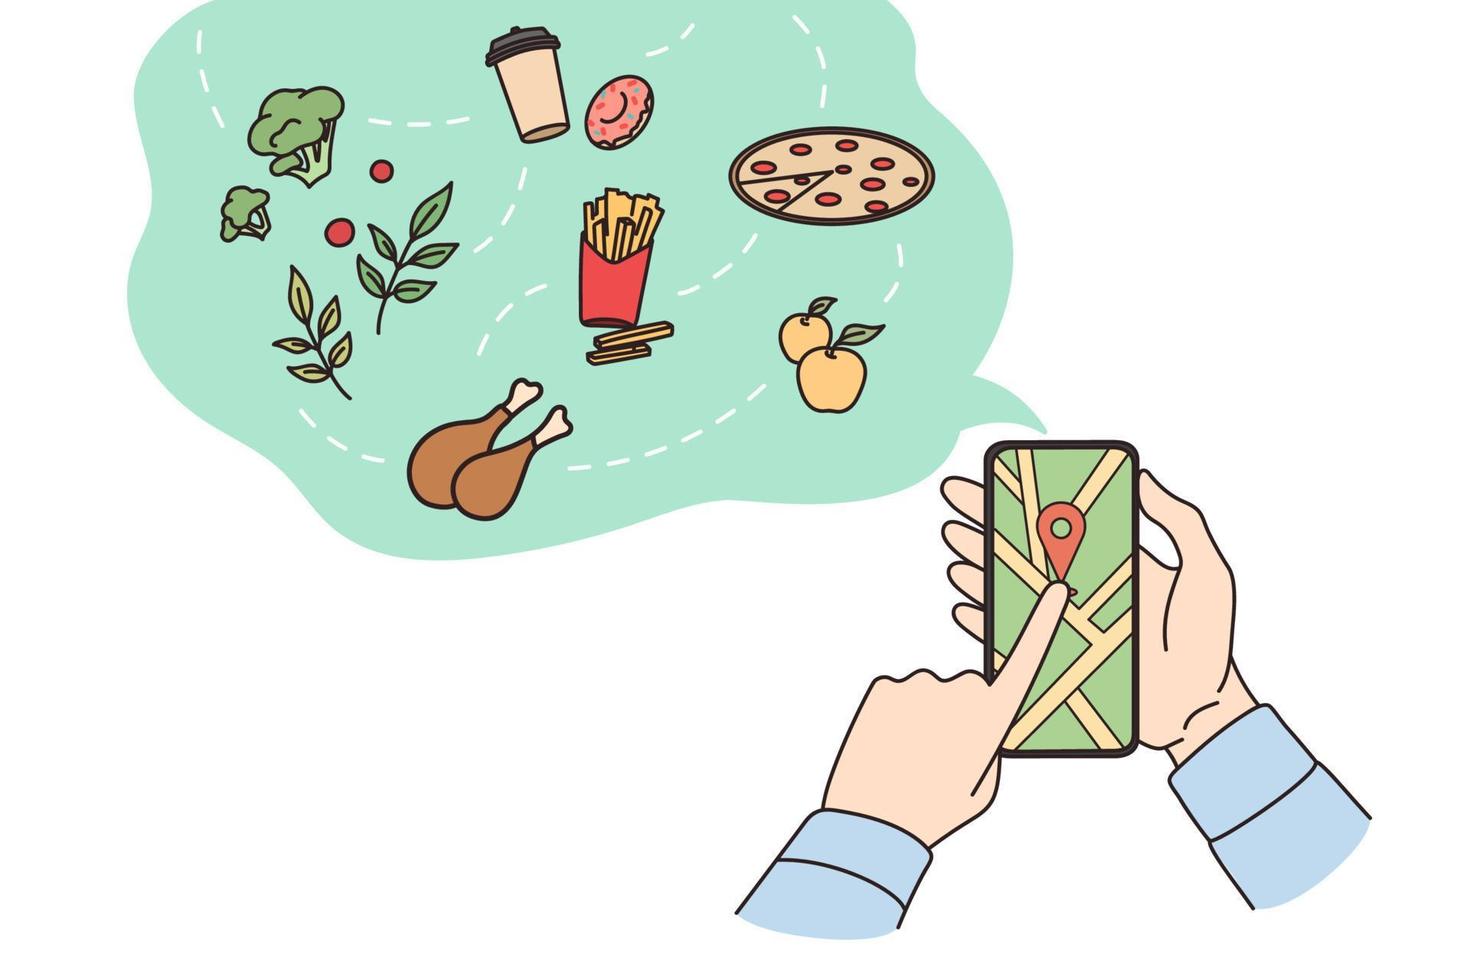 Person hold cellphone order food or products online on gadget. Man use smartphone for fast dish delivery from restaurant or cafe. Good deliver service on mobile app. Flat vector illustration.